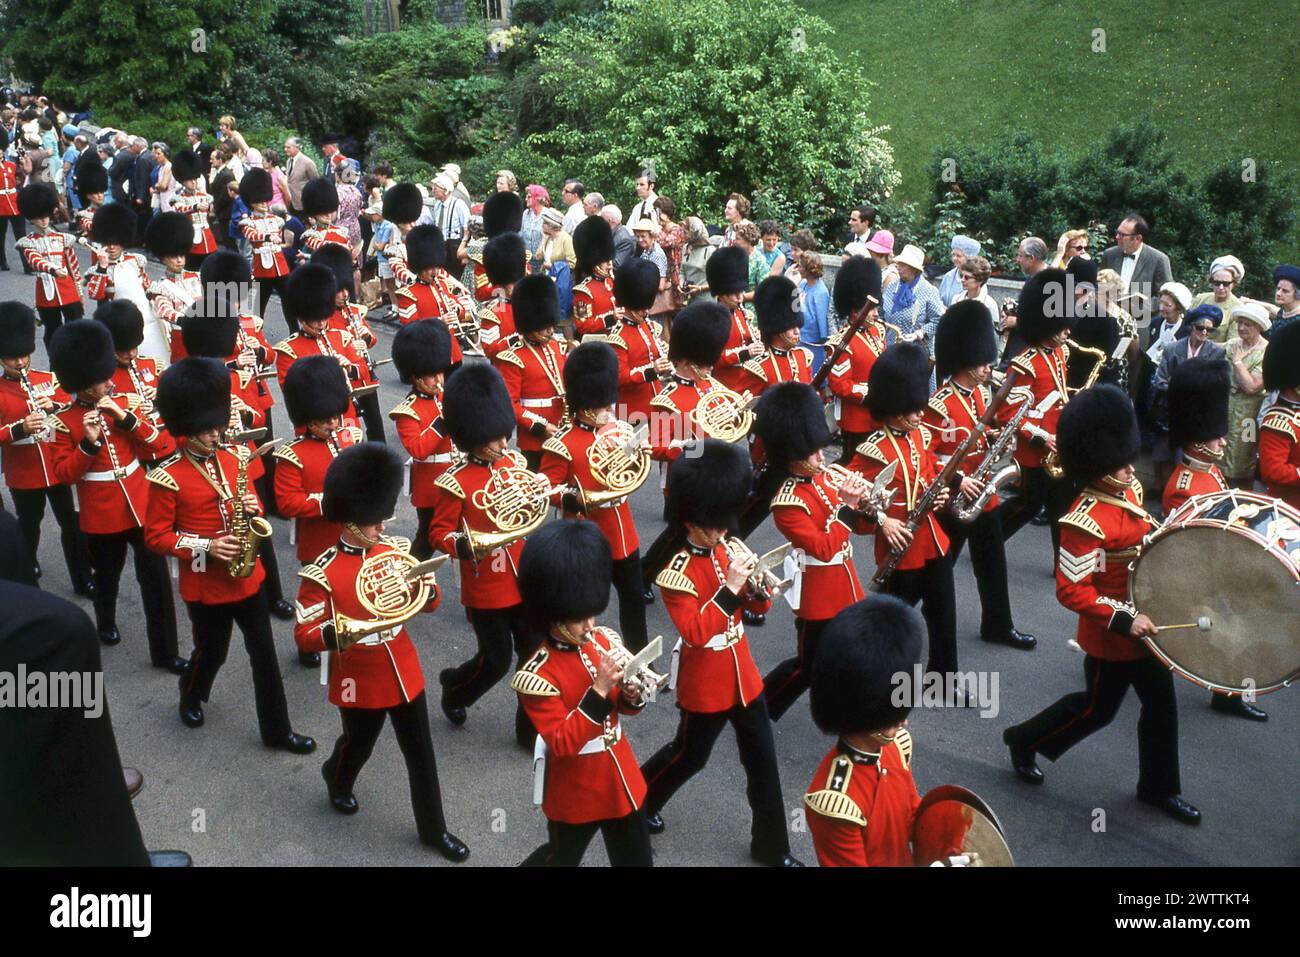 1960s, historical, view from above of the band of the Grenadier Guards in full dress uniform and traditional fur cap, known as bearskins, playing their instruments as they march at the Order of the Garter and Procession event at Windsor Castle, Berkshjire, England, UK. One of the oldest and most famous military bands, with a long history, dating back to 1665, the band, as part of the Bands of the Household Division, plays at important British ceremonial and royal events. Stock Photo